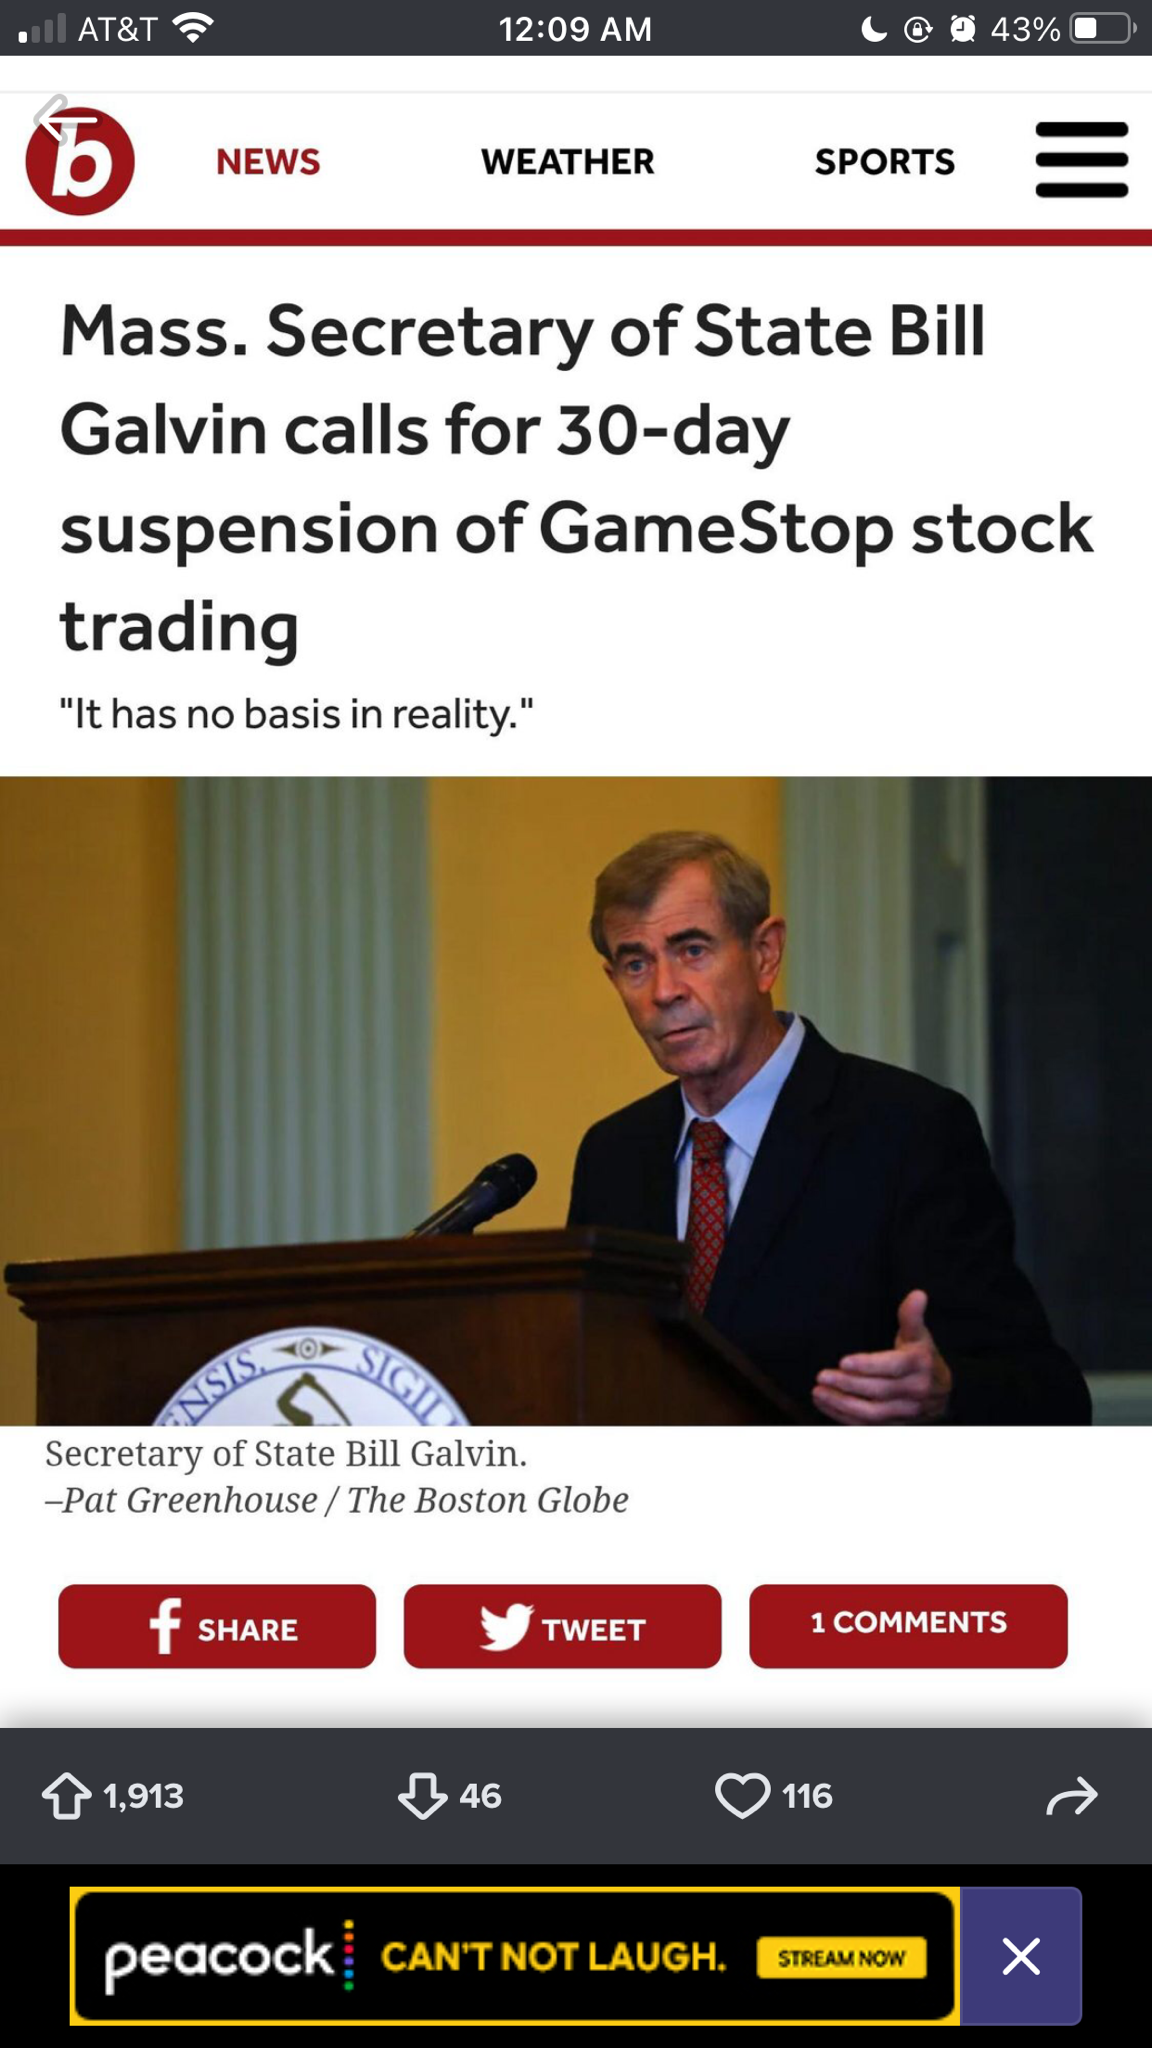 conversation - At&T @ 43% News Weather Sports Iii Mass. Secretary of State Bill Galvin calls for 30day suspension of GameStop stock trading "It has no basis in reality." Ns Secretary of State Bill Galvin Pat Greenhouse The Boston Globe f Tweet 1 1913 116 